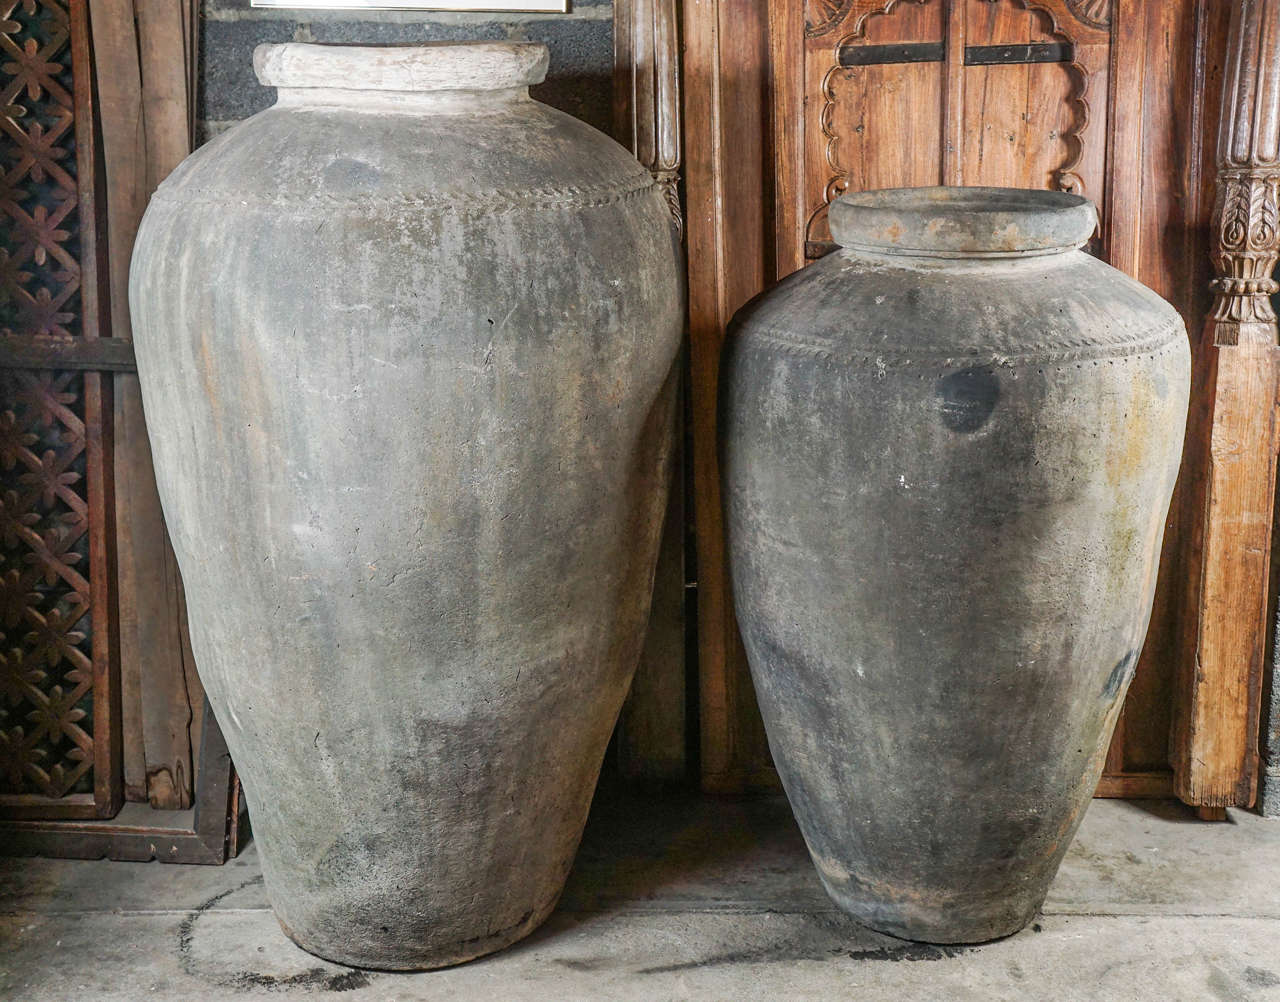 Monumental clay pots from Northern India, can be used as a garden sculptures.
Size:
Large: 61 “H X39 “ Diameter Price: $2500 
Small: 51”H X32” Diameter Price: $2200.